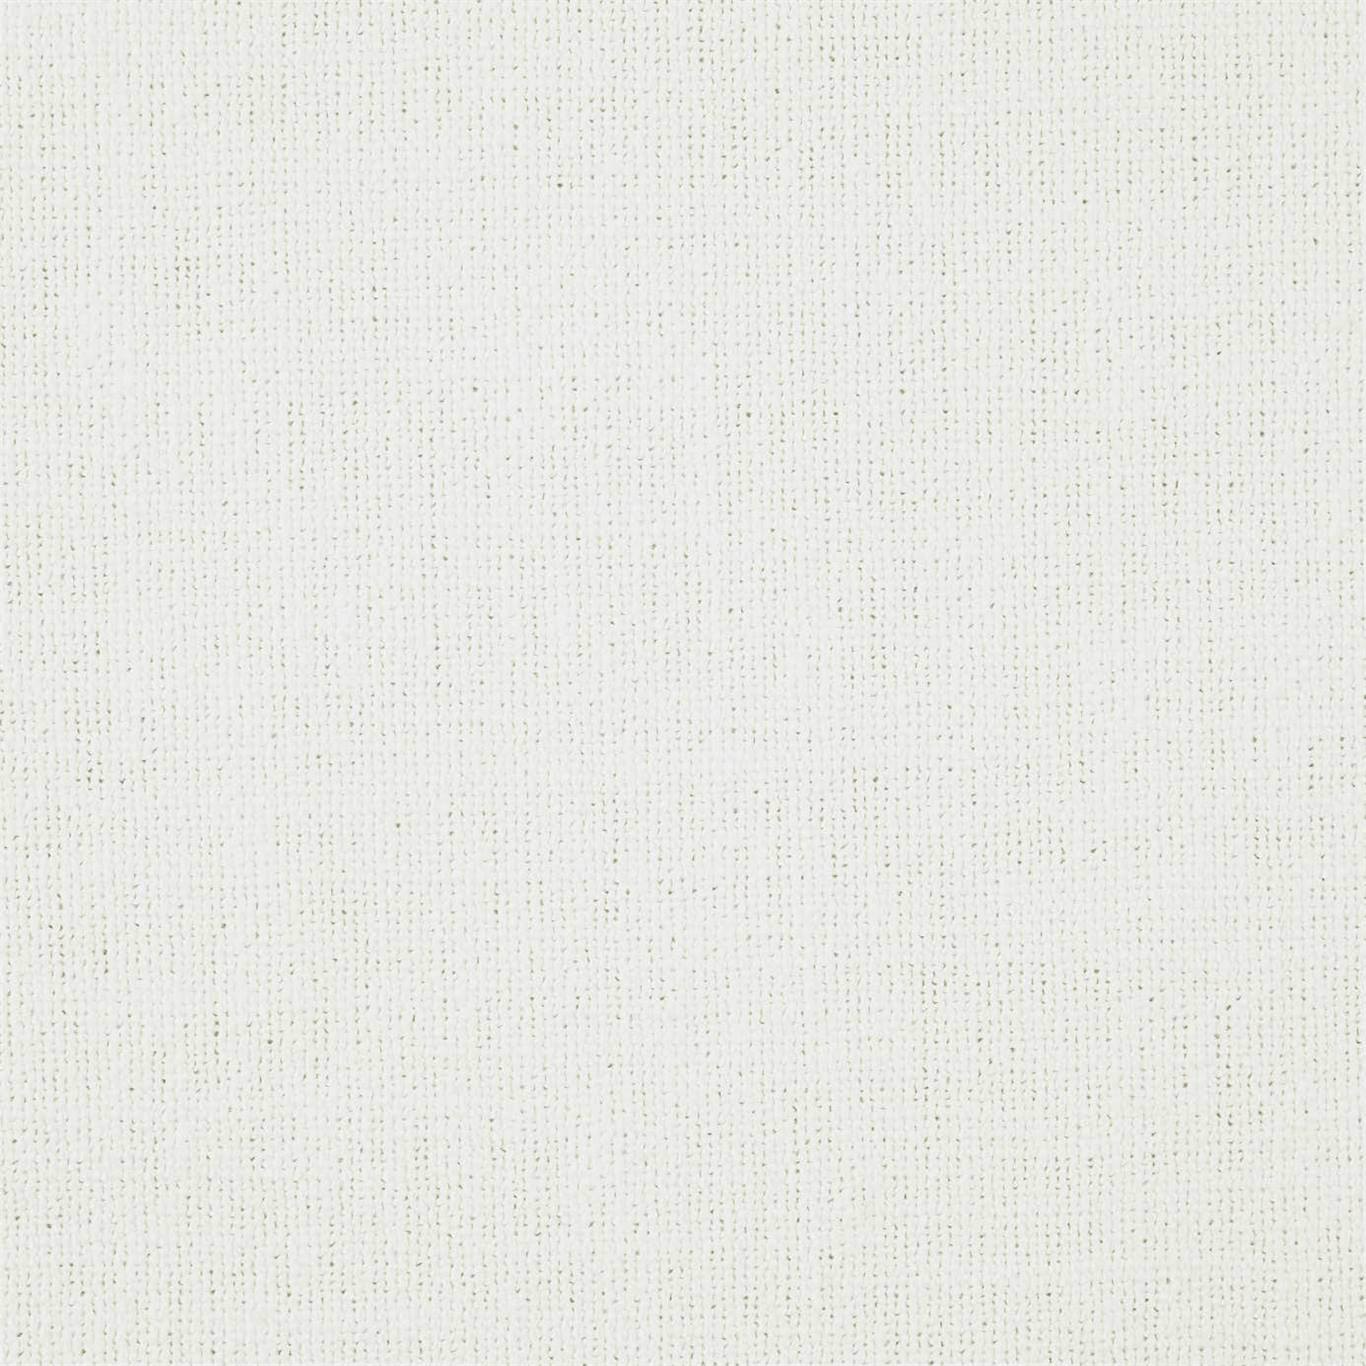 Subject White Cotton Fabric by HAR